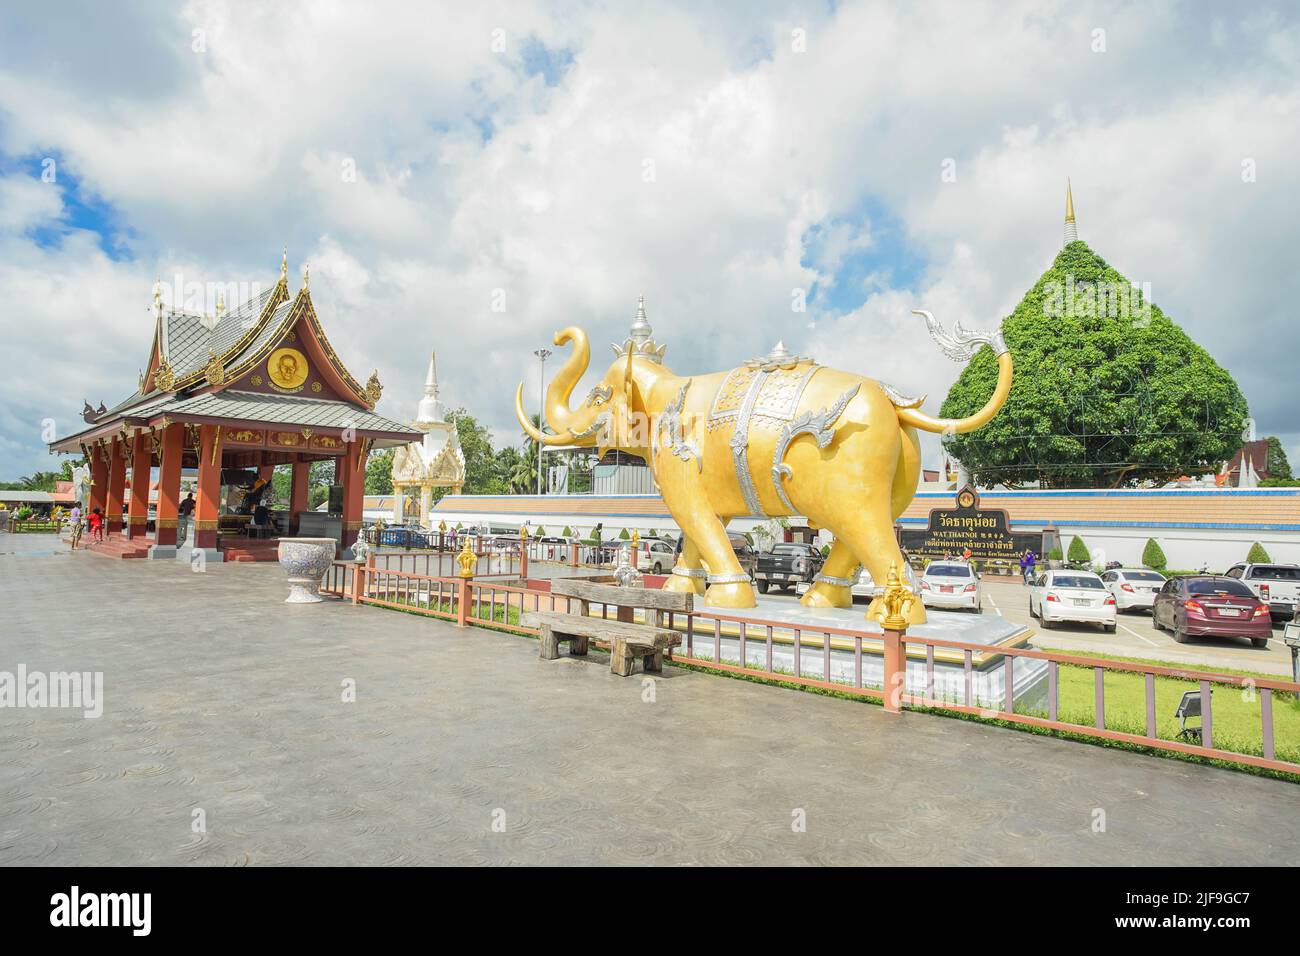 Nakhon Si Thammarat Province, THAILAND - June 26, 2022: Scenery of The famous temple named Wat That Noi in Nakhon Si Thammarat, Thailand. This temple Stock Photo